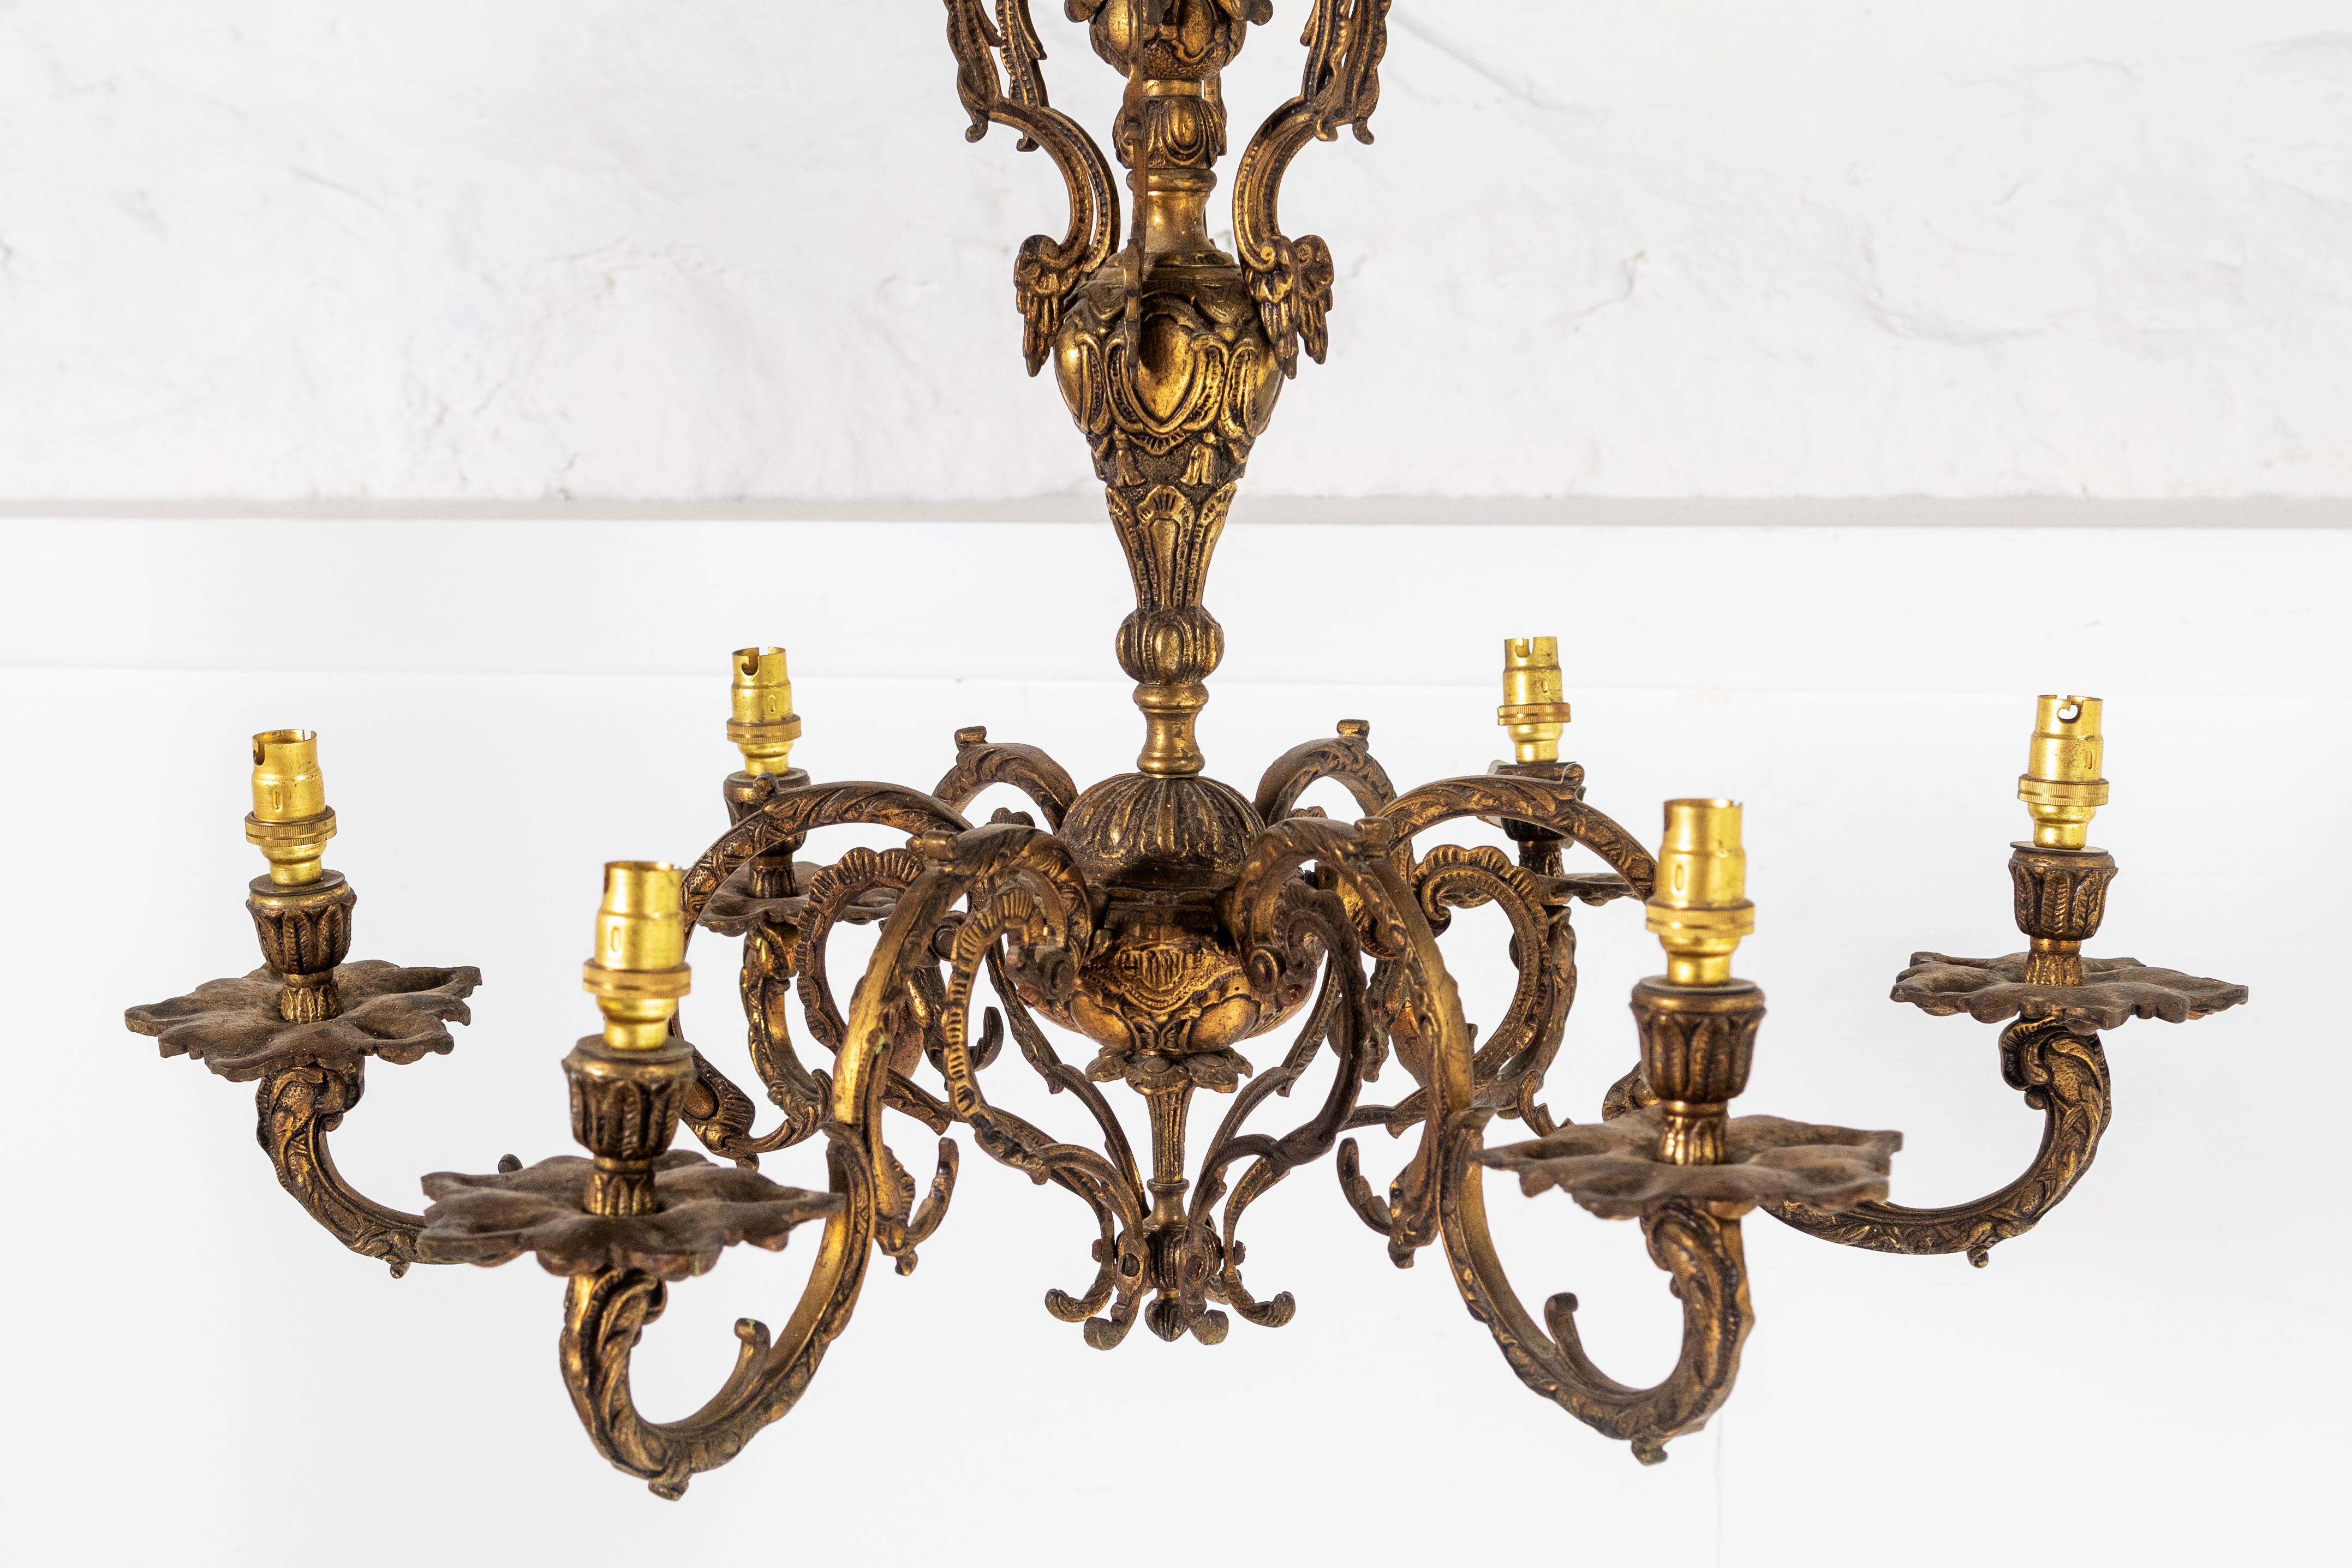 A superb French gilded cast bronze 6 arm chandelier, ornate scrolling arms with leaf bobeche drip pans and bulbous candle sconces, issuing from an ornate foliated central column with scrolling leaf canopy.
A beautiful piece, the original faded